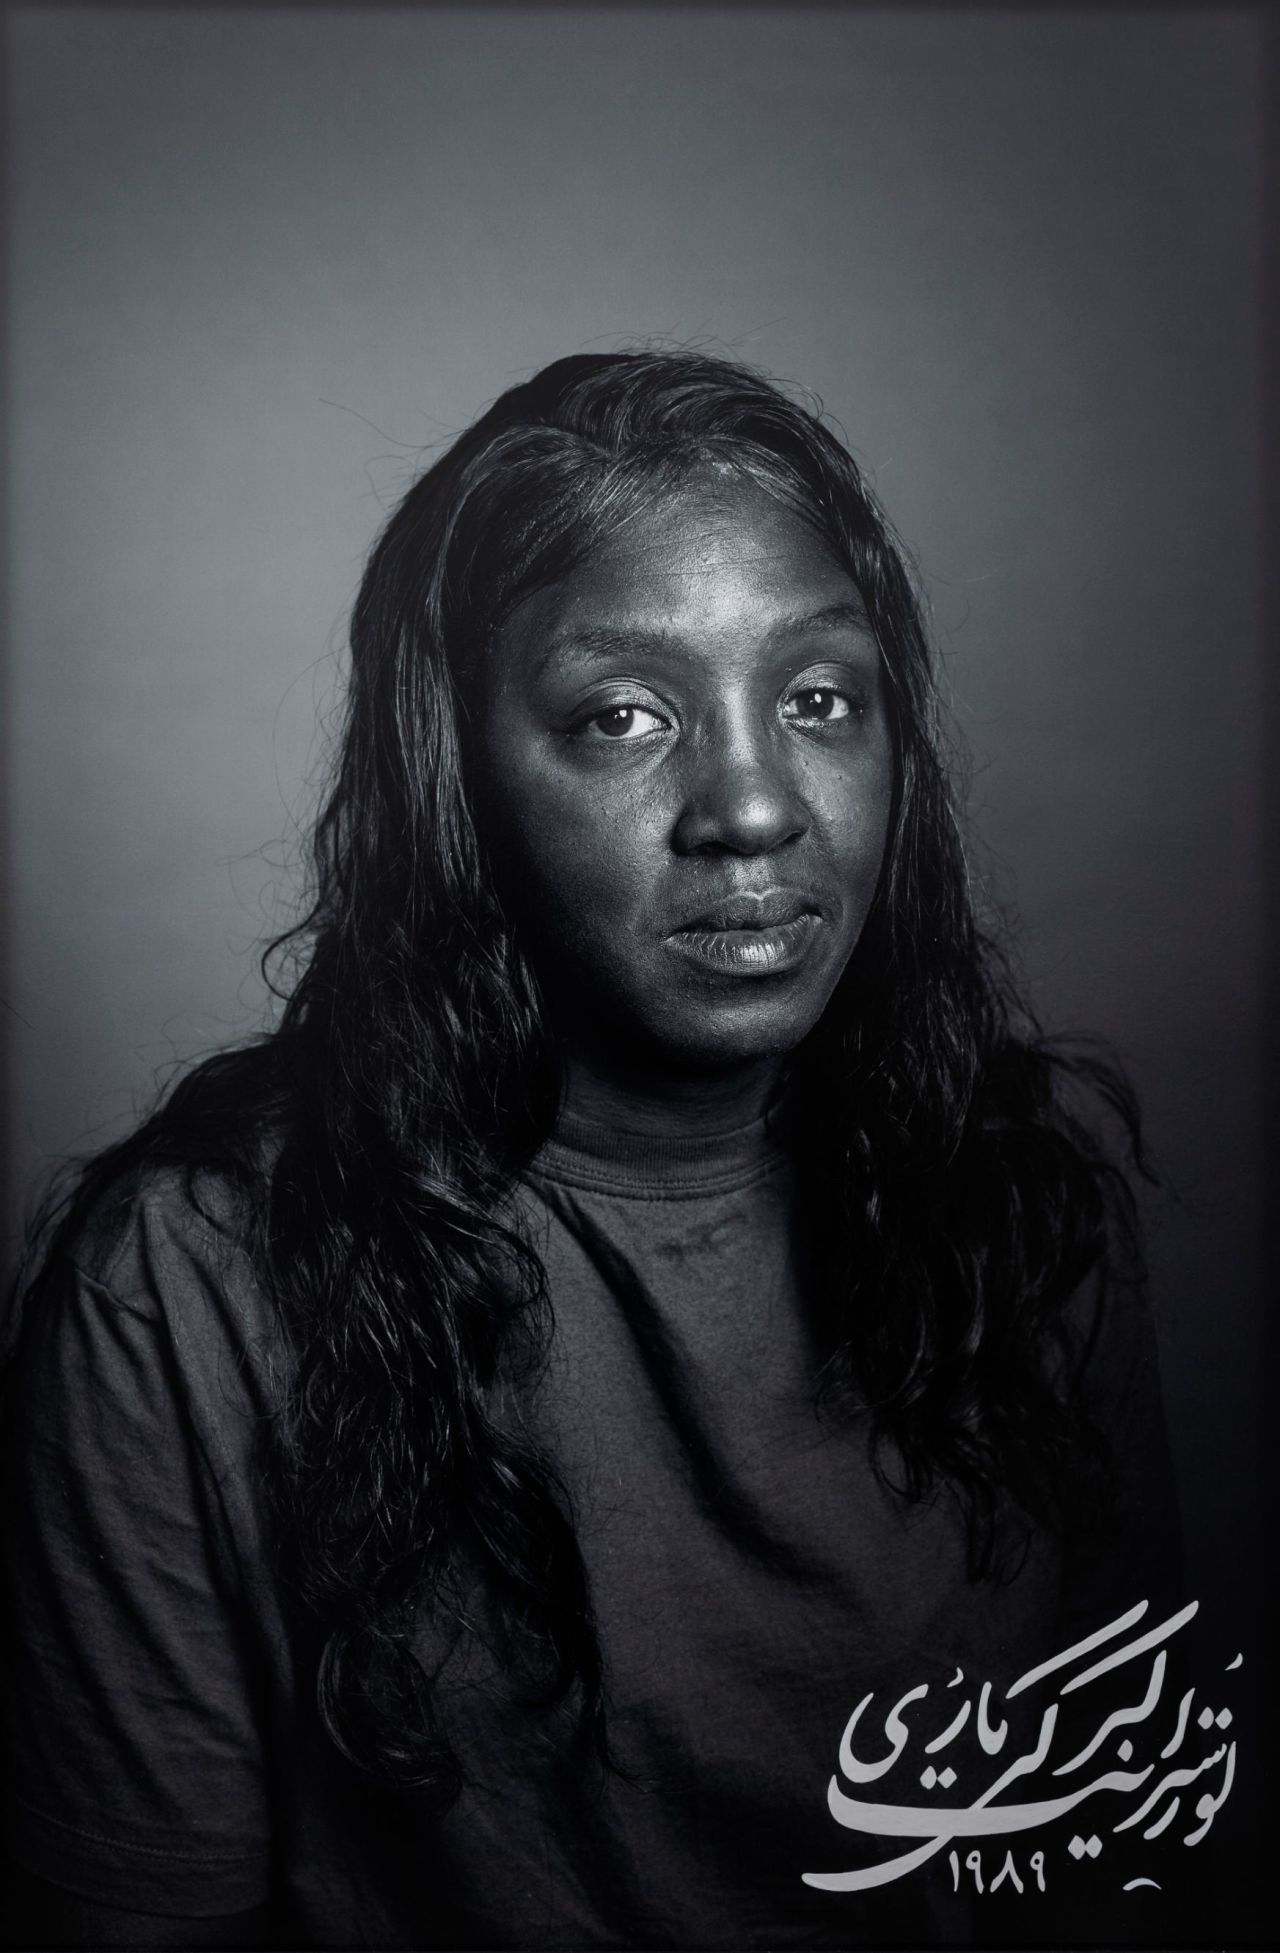 "Marie Overstreet" from "Land of Dreams" (2019). "I believe the work is unique in the way that it shows a nomadic person whose gaze is always navigating between cultures that she doesn't completely belong to anymore," Neshat writes.